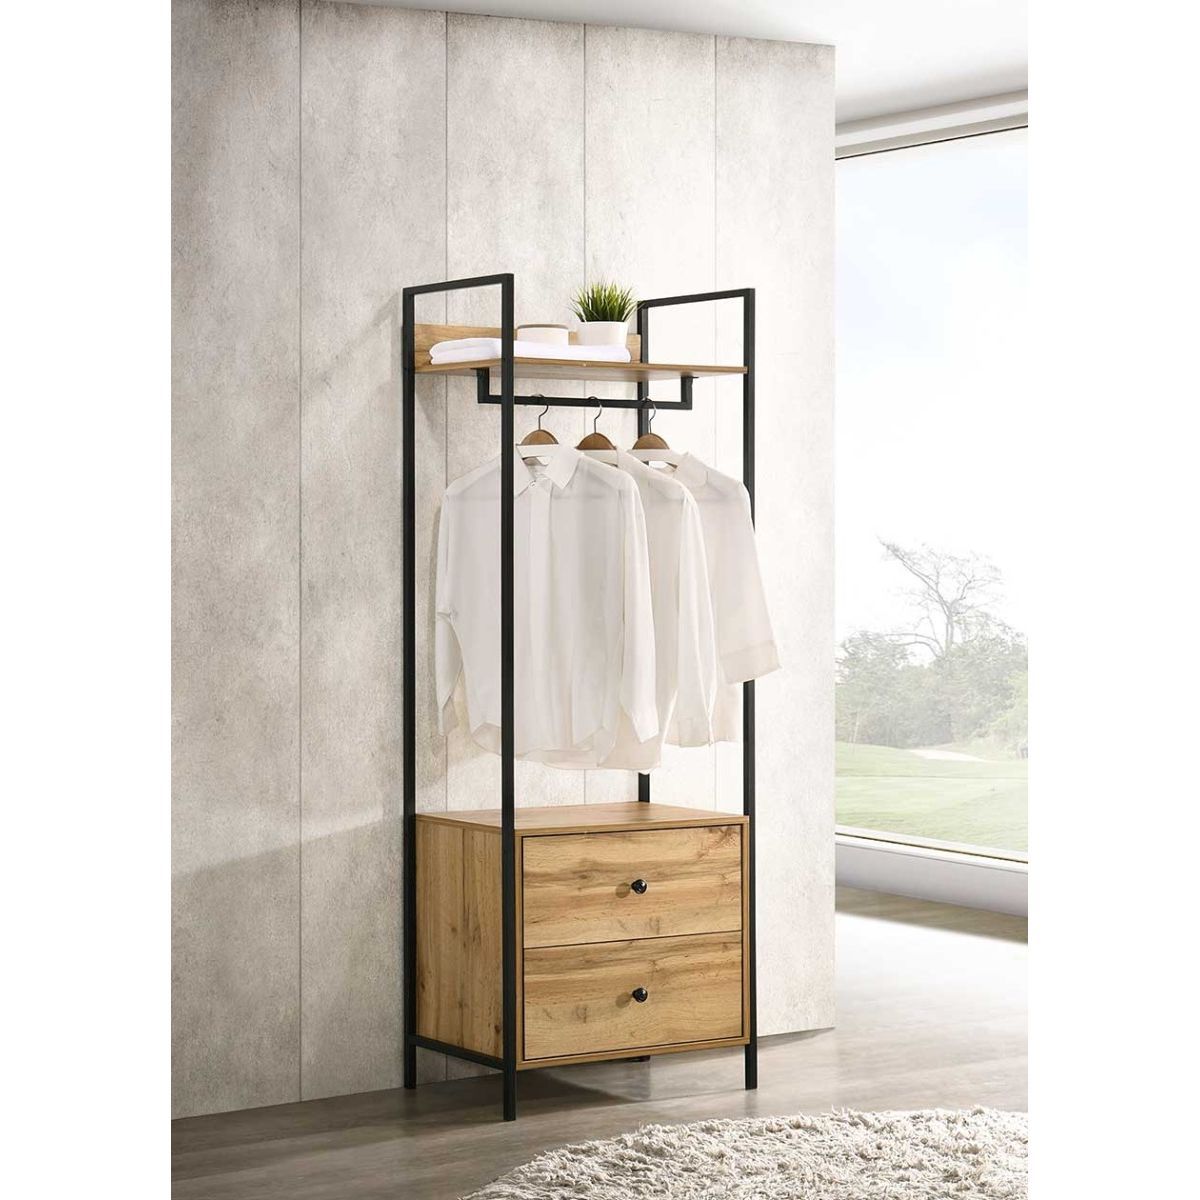 Zahra Bedroom Open Wardrobe With 2 Drawers Throughout Wardrobes With Two Drawers (Gallery 6 of 20)